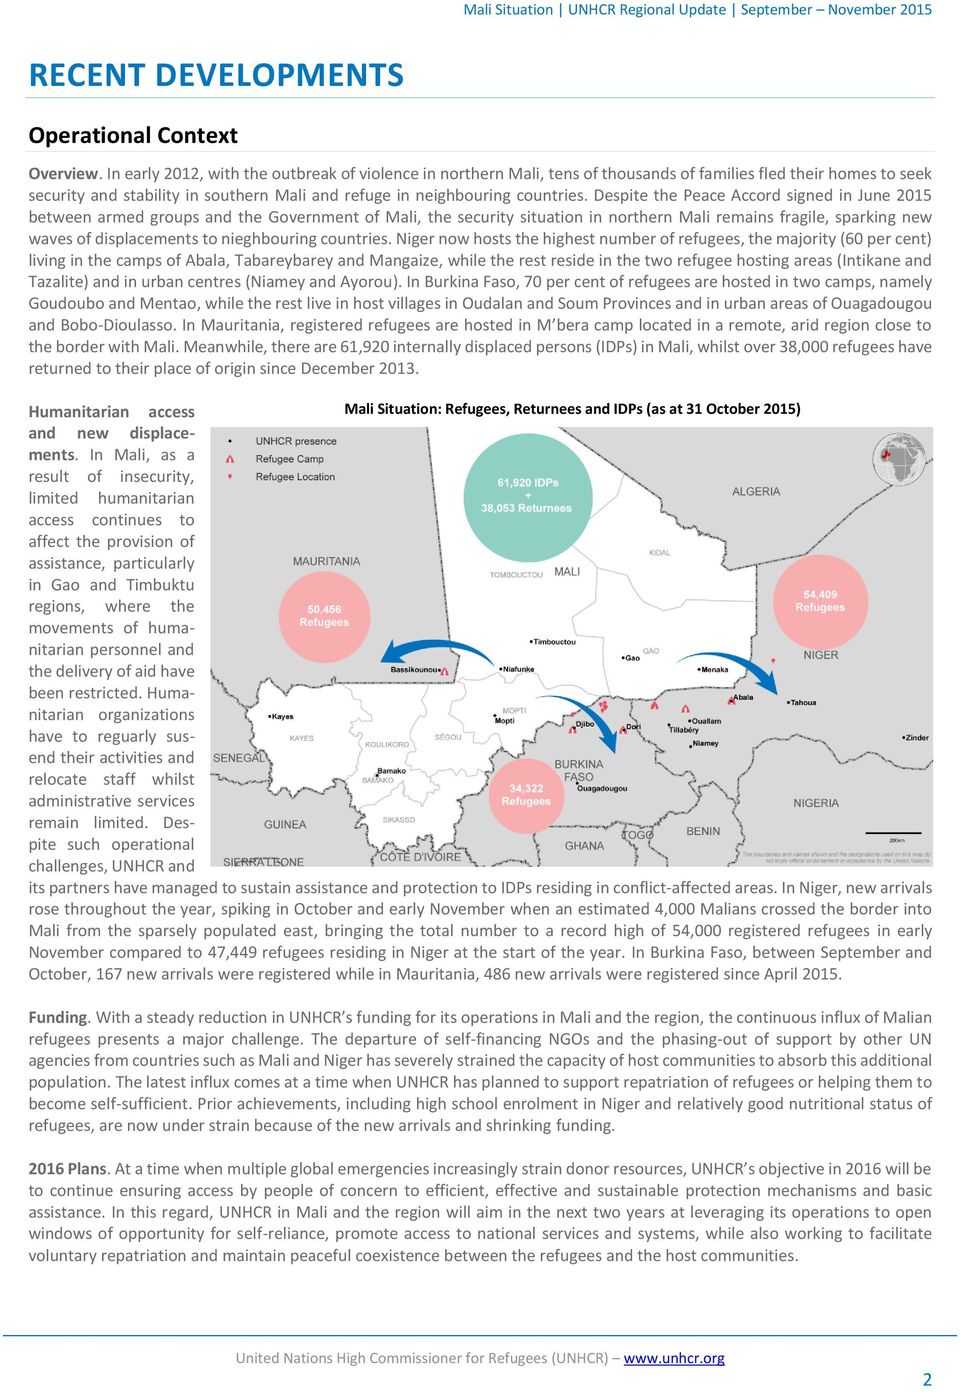 Despite the Peace Accord signed in June 2015 between armed groups and the Government of Mali, the security situation in northern Mali remains fragile, sparking new waves of displacements to